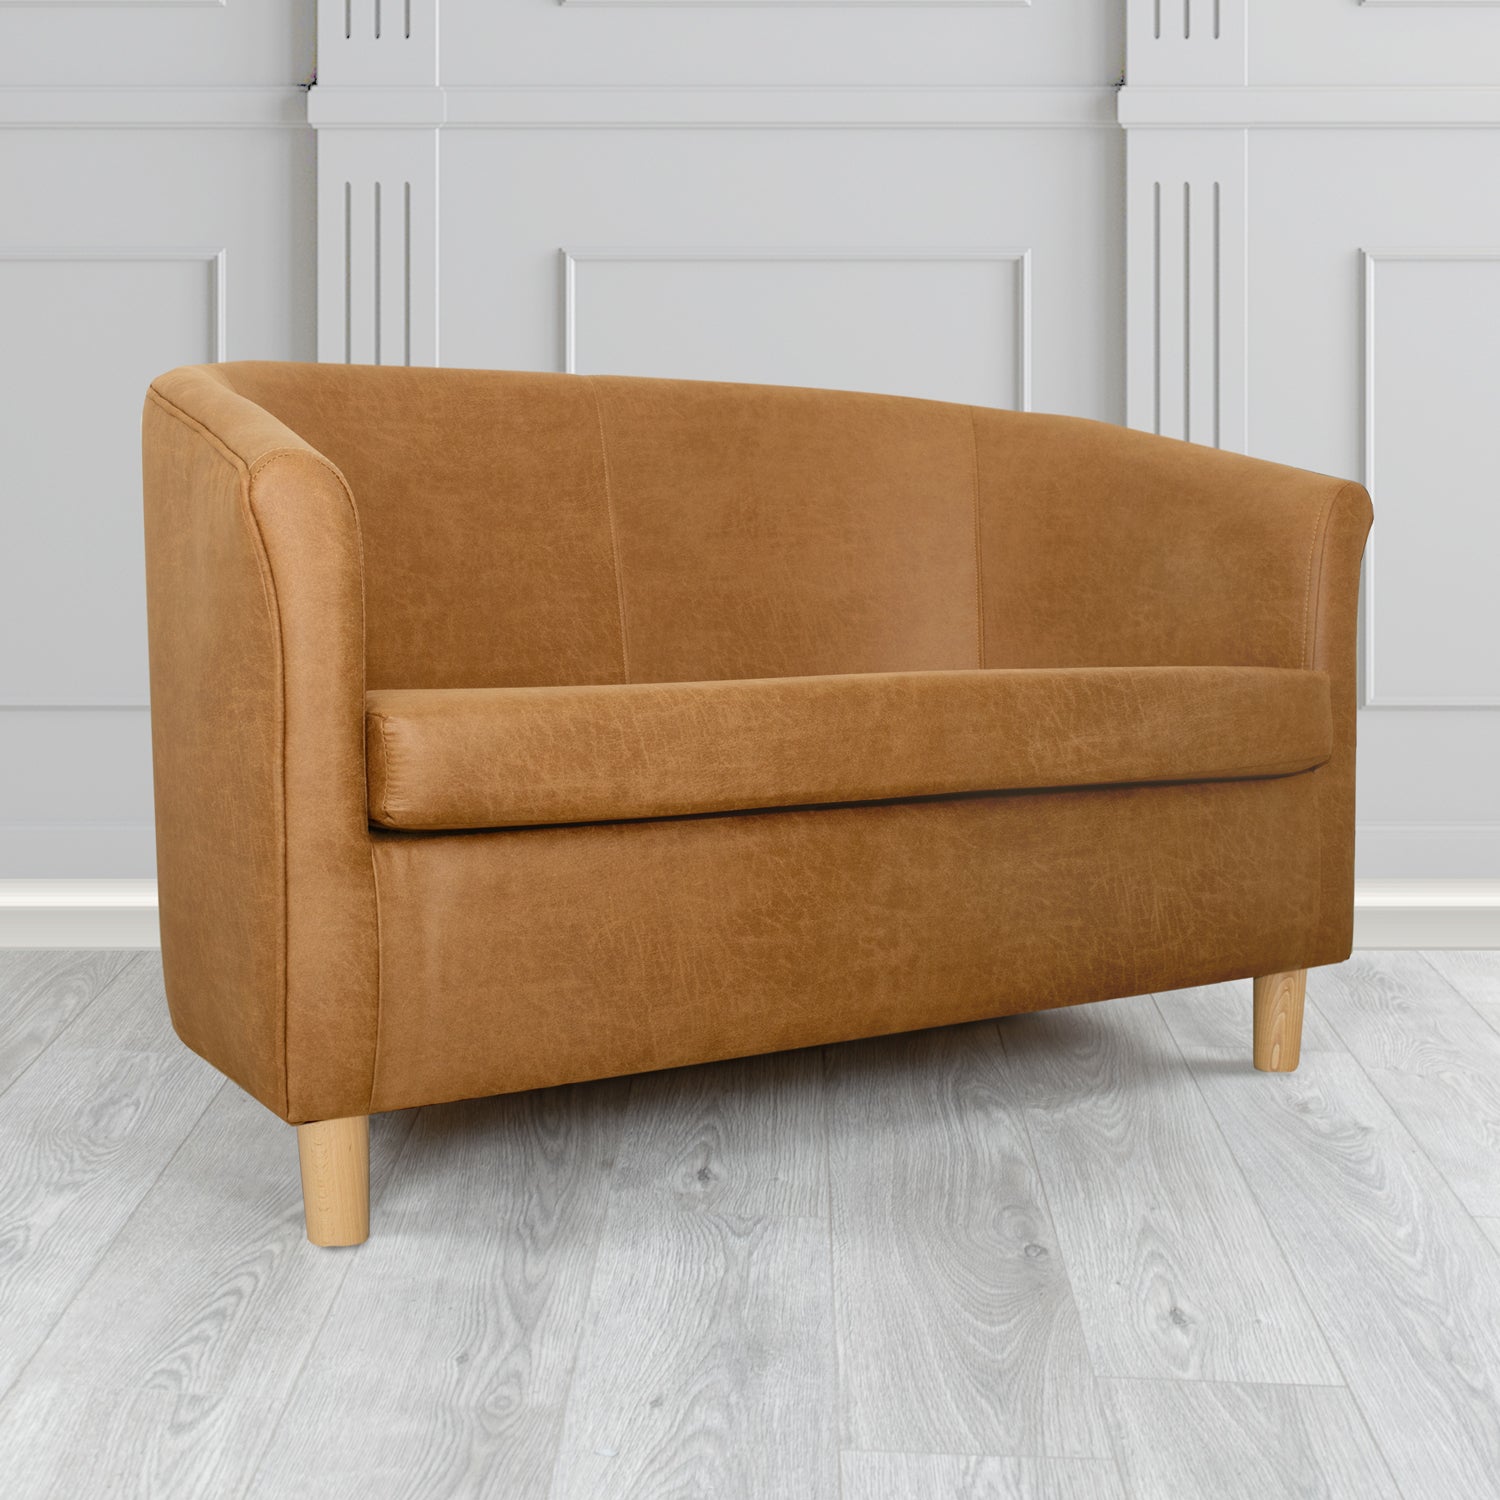 Tuscany 2 Seater Tub Sofa in Nevada Rust Faux Leather - The Tub Chair Shop